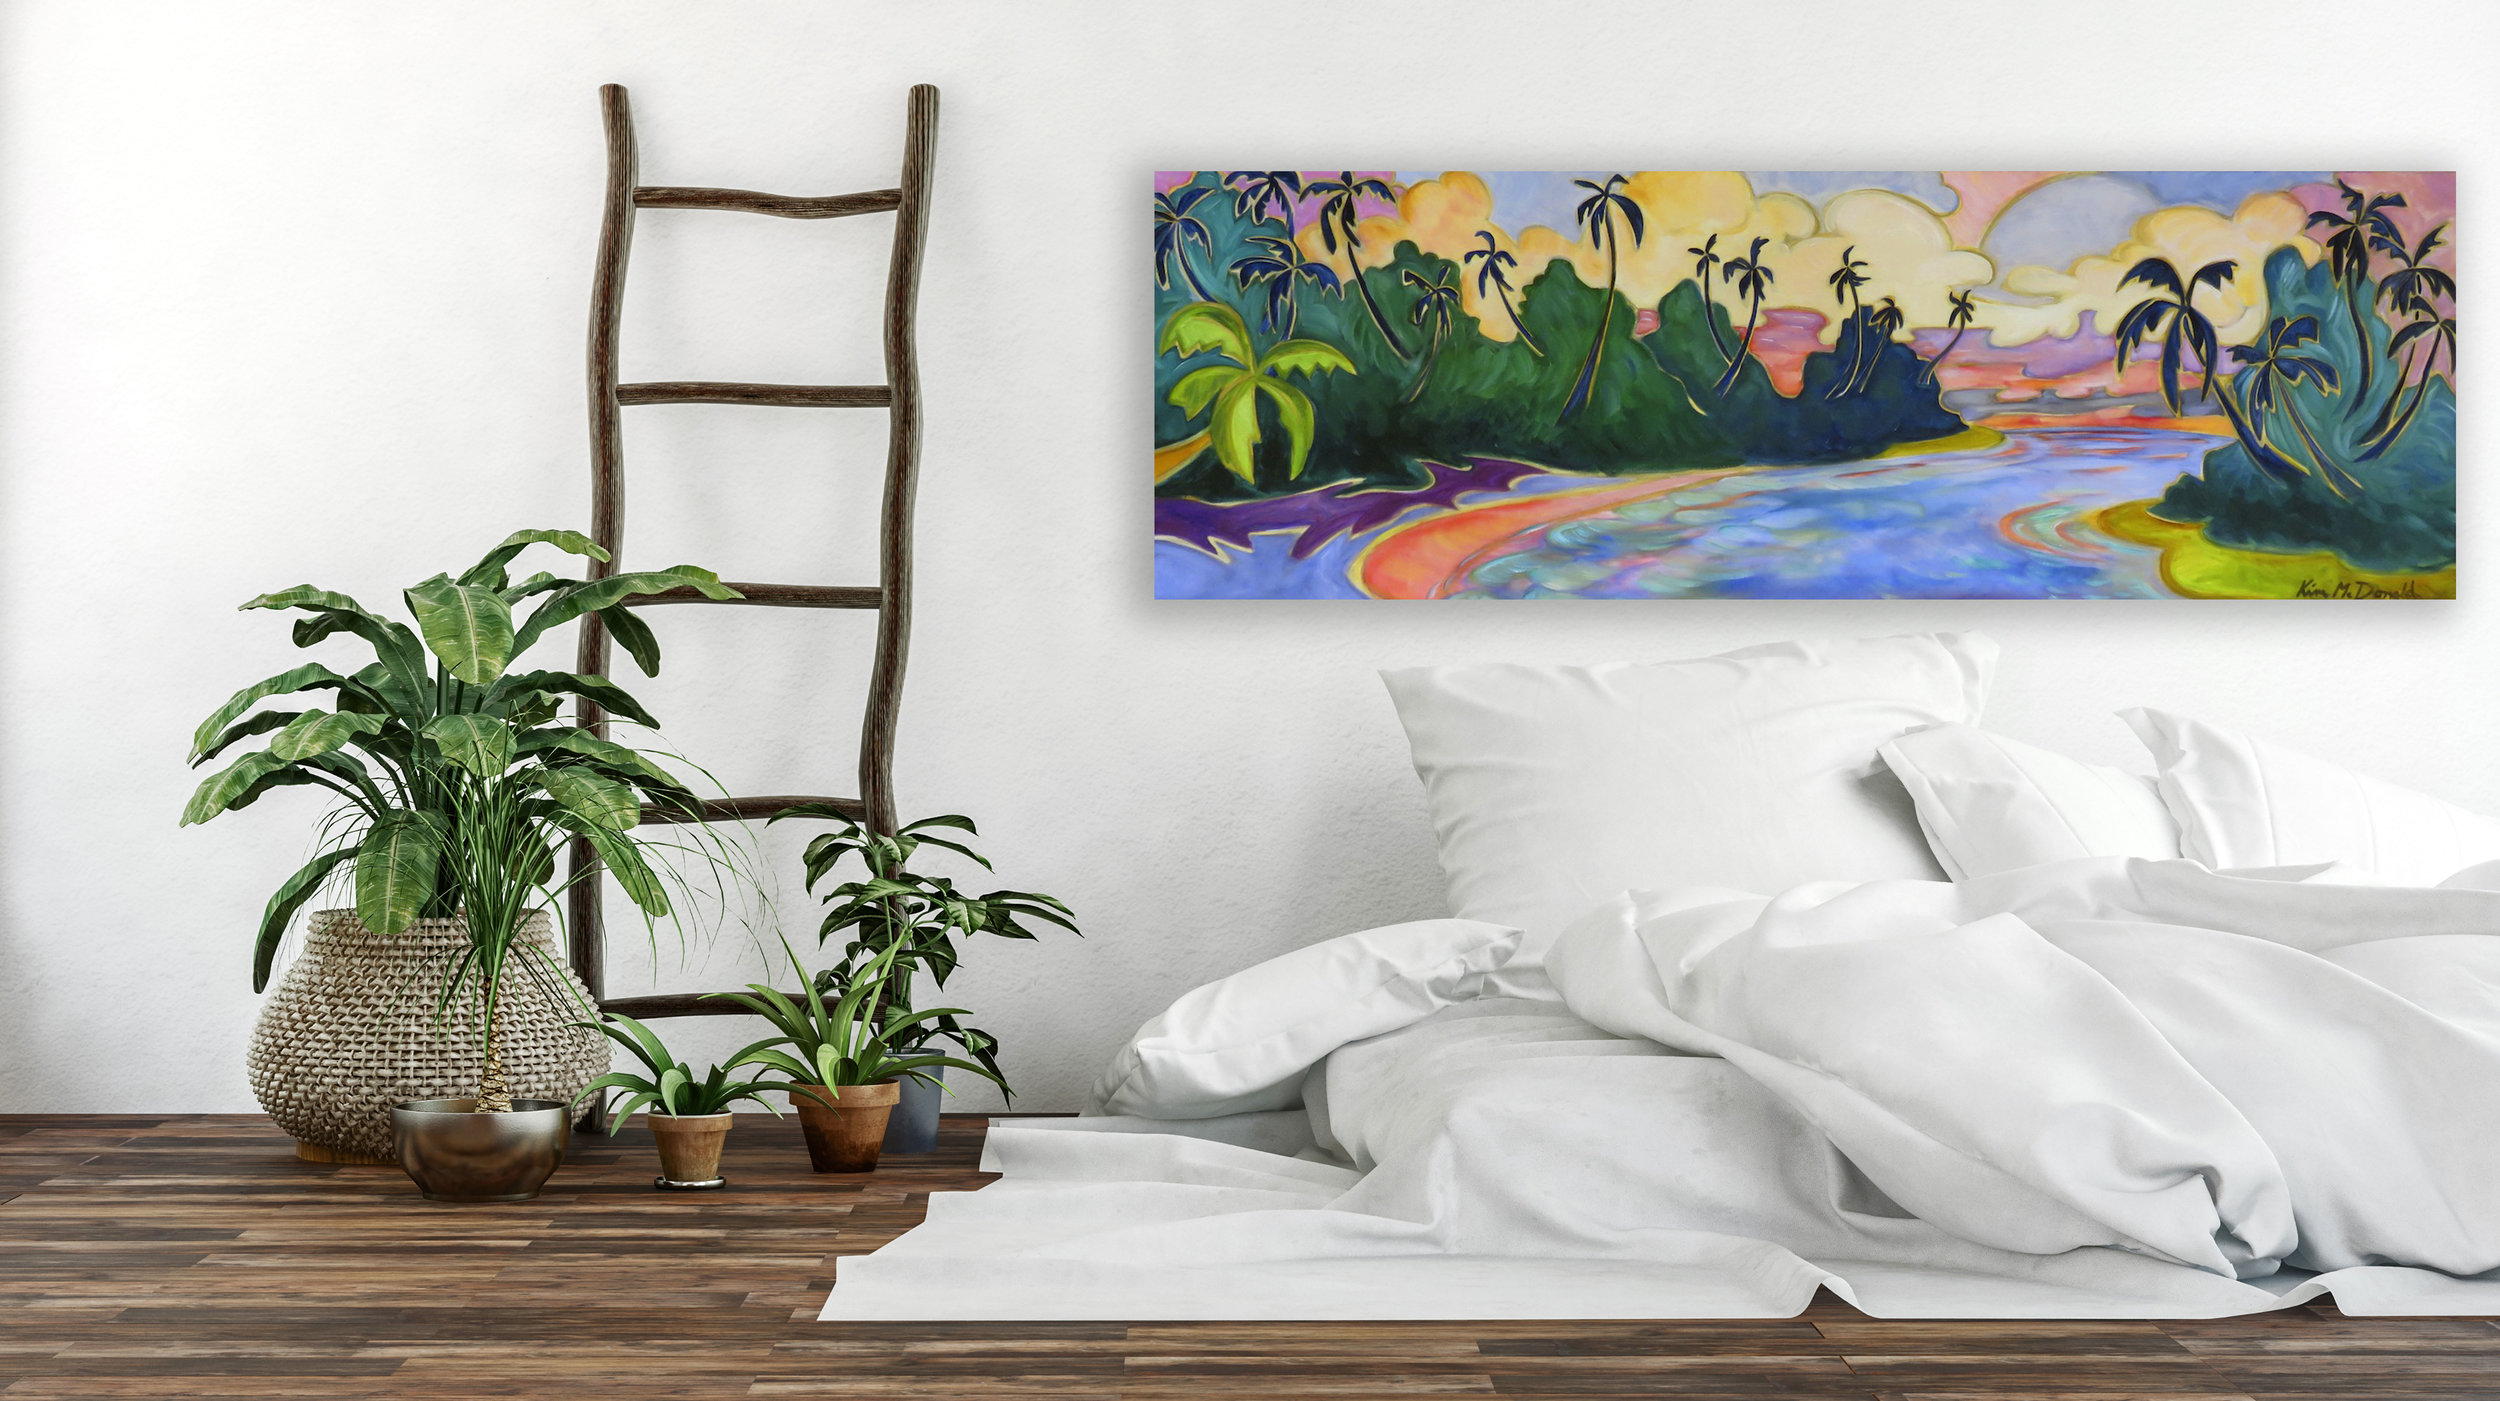  Maui inspired painting by artist Kim McDonald on a bedroom wall 